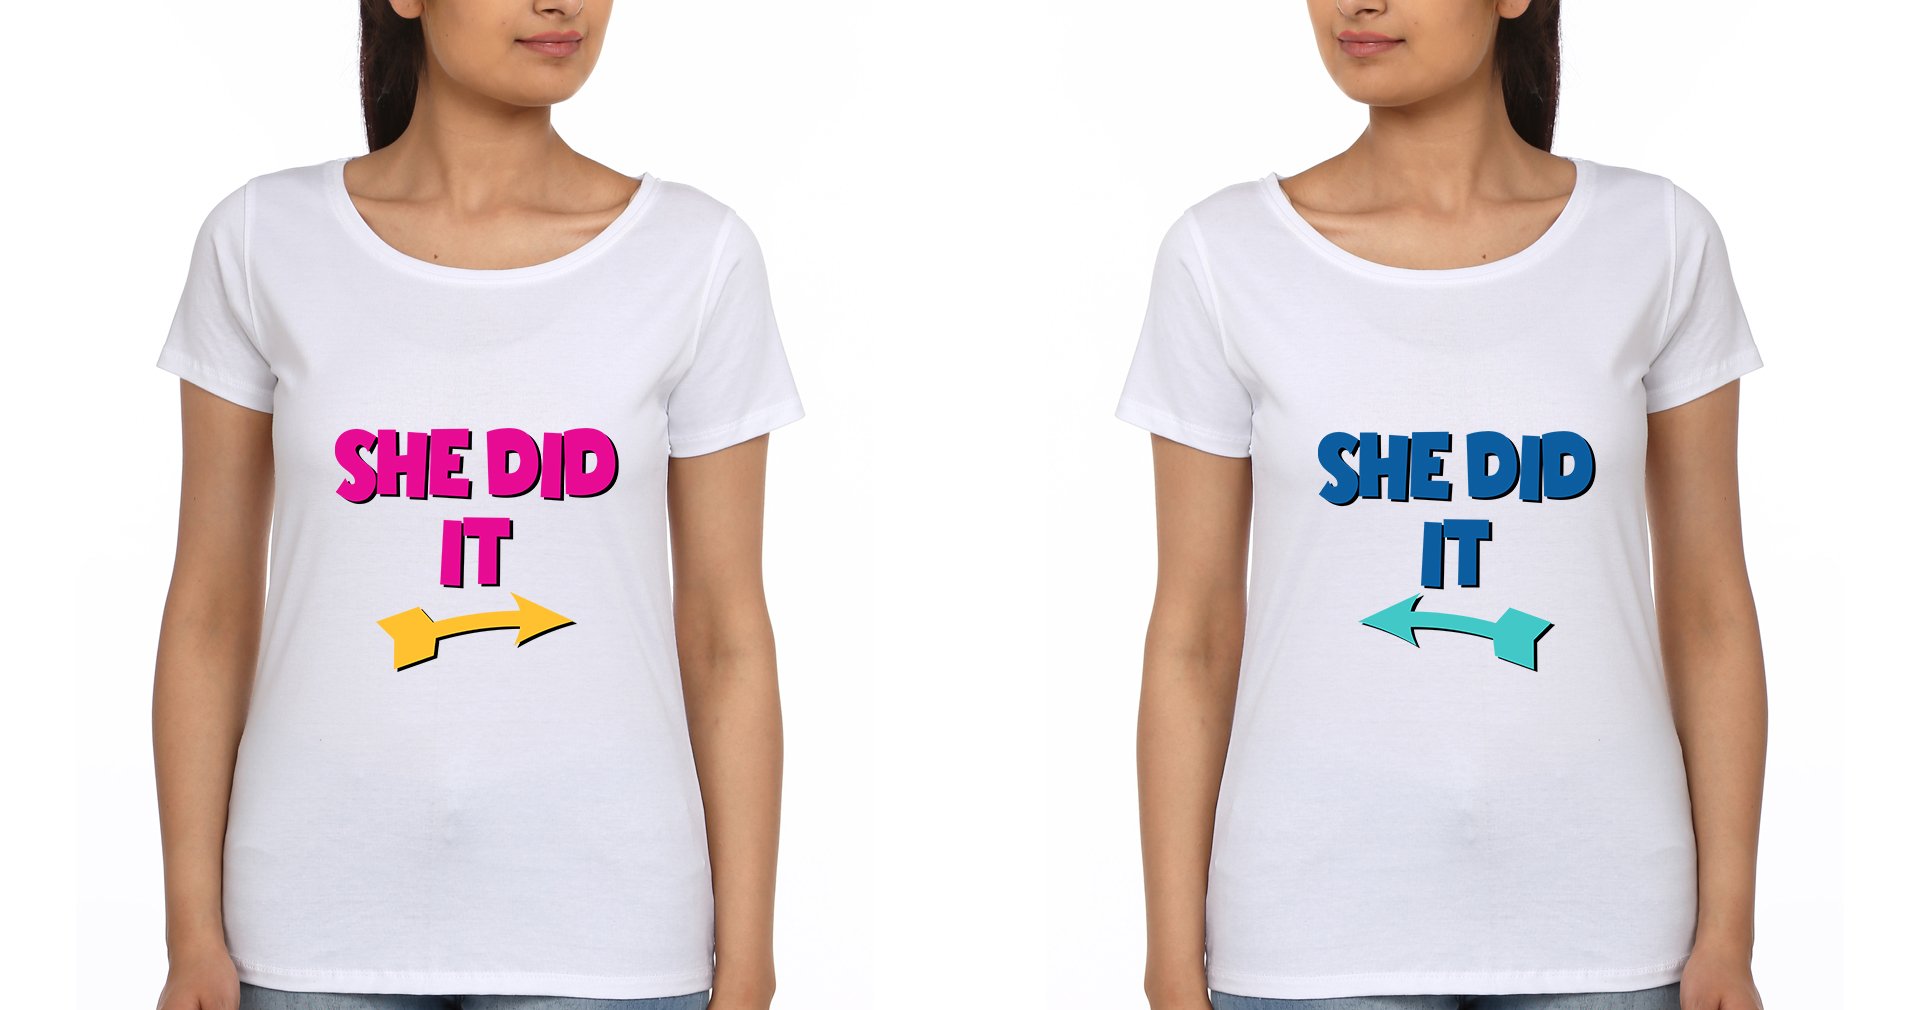 She Did It Sister Sister Half Sleeves T-Shirts -FunkyTradition